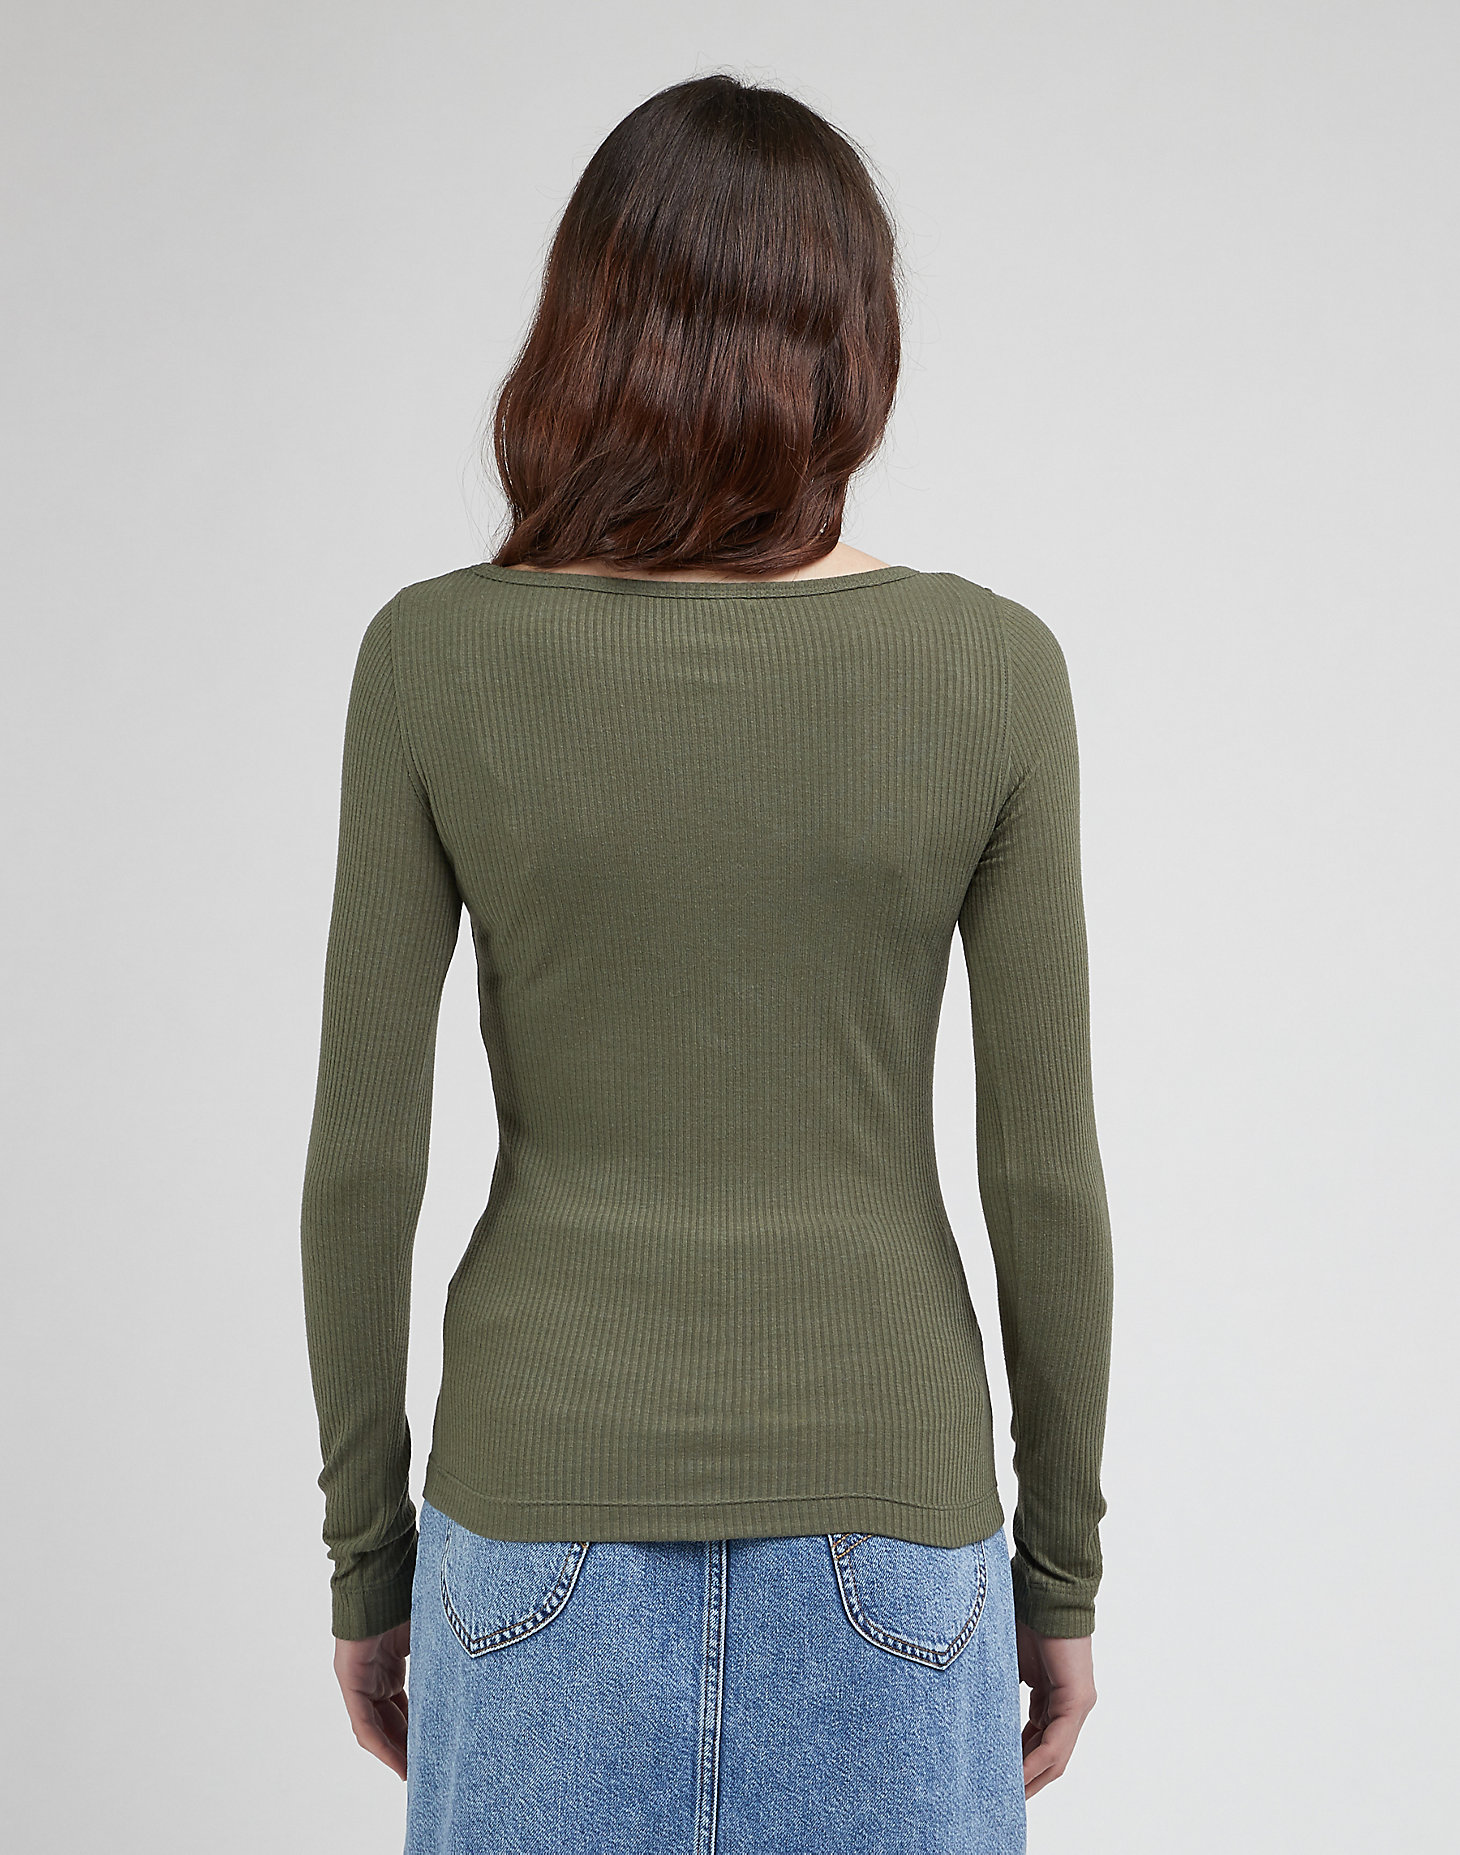 Long Sleeve Boat Neck Tee in Olive Grove alternative view 1